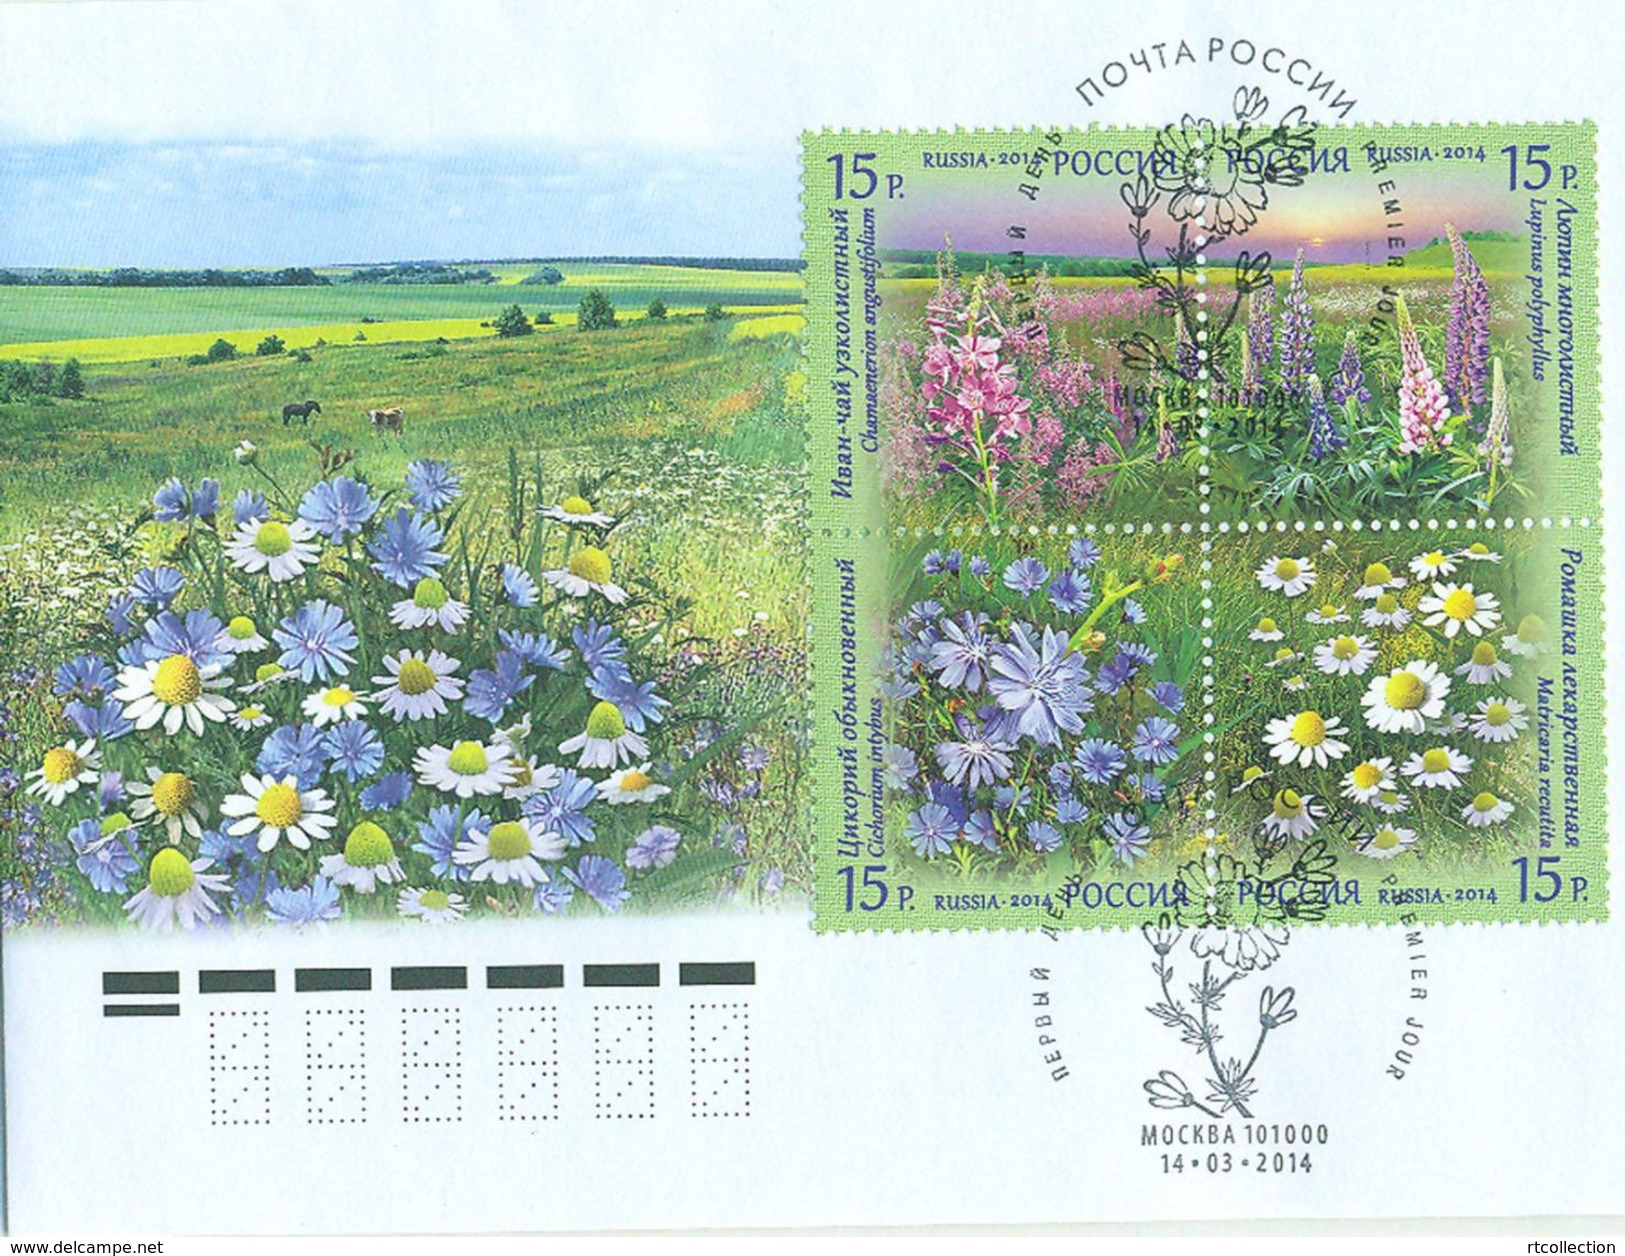 Russia 2014 FDC Flora Wild Flowers Nature Flower Stamps Michel 2027-2030zd Cancellation Place - Moscow - FDC